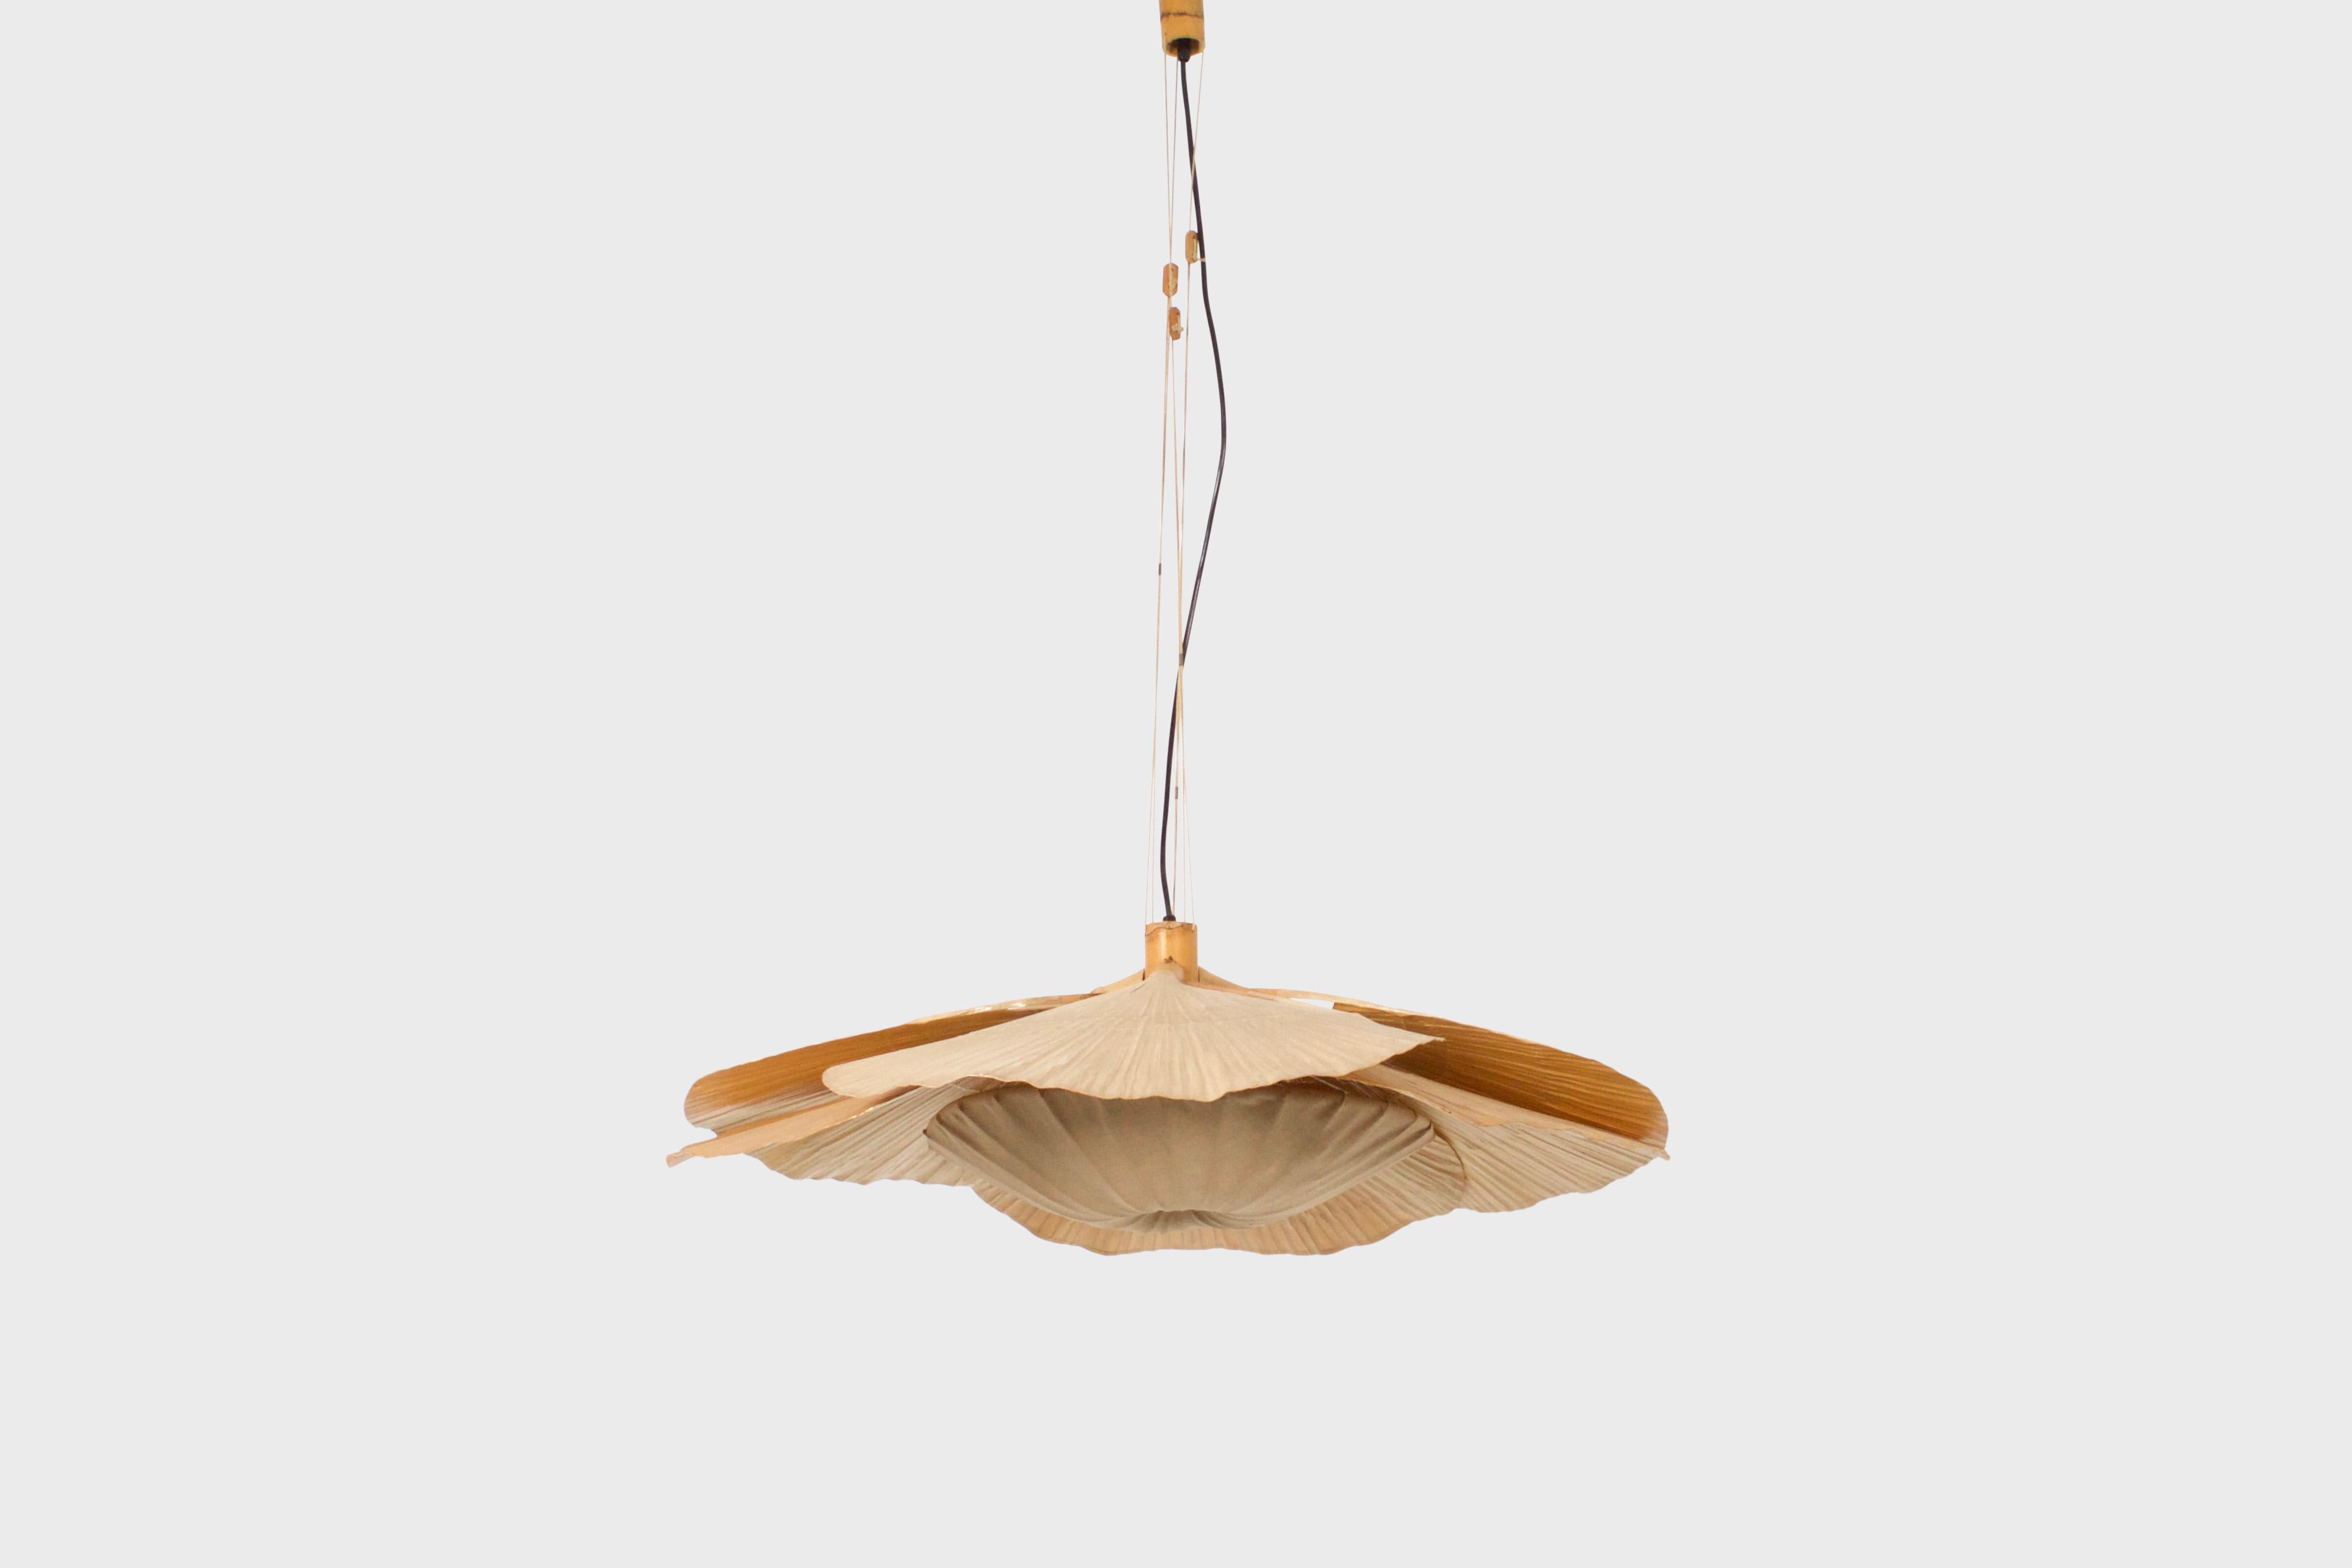 Rare large Uchiwa Hana chandelier by Ingo Maurer in very good condition. 

Designed by Ingo Maurer for M design, Germany. 

This lamp is handmade from bamboo, fabric and Japanese rice paper. 

The lamp consists of six large fans hanging from a